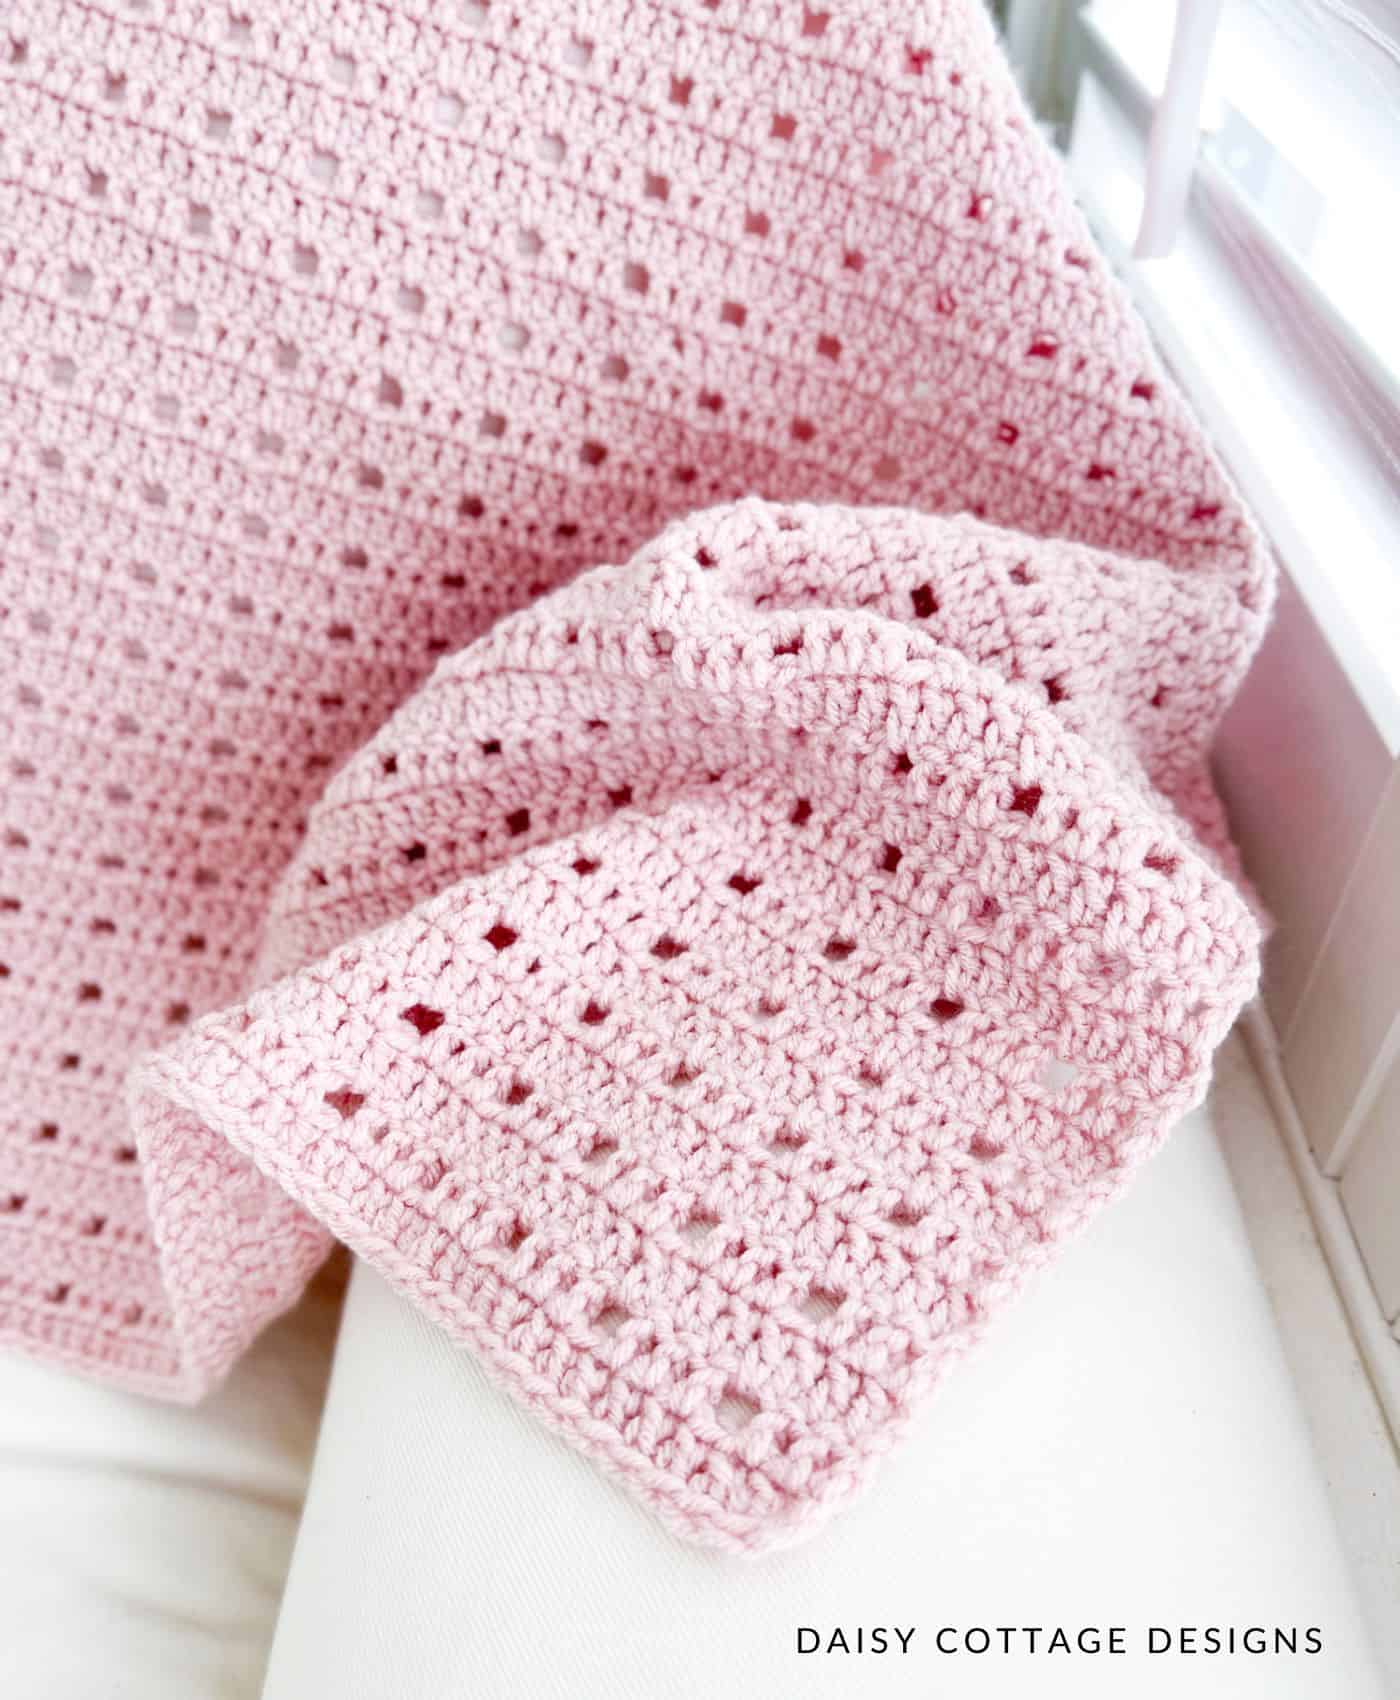 Simple crochet blanket on couch